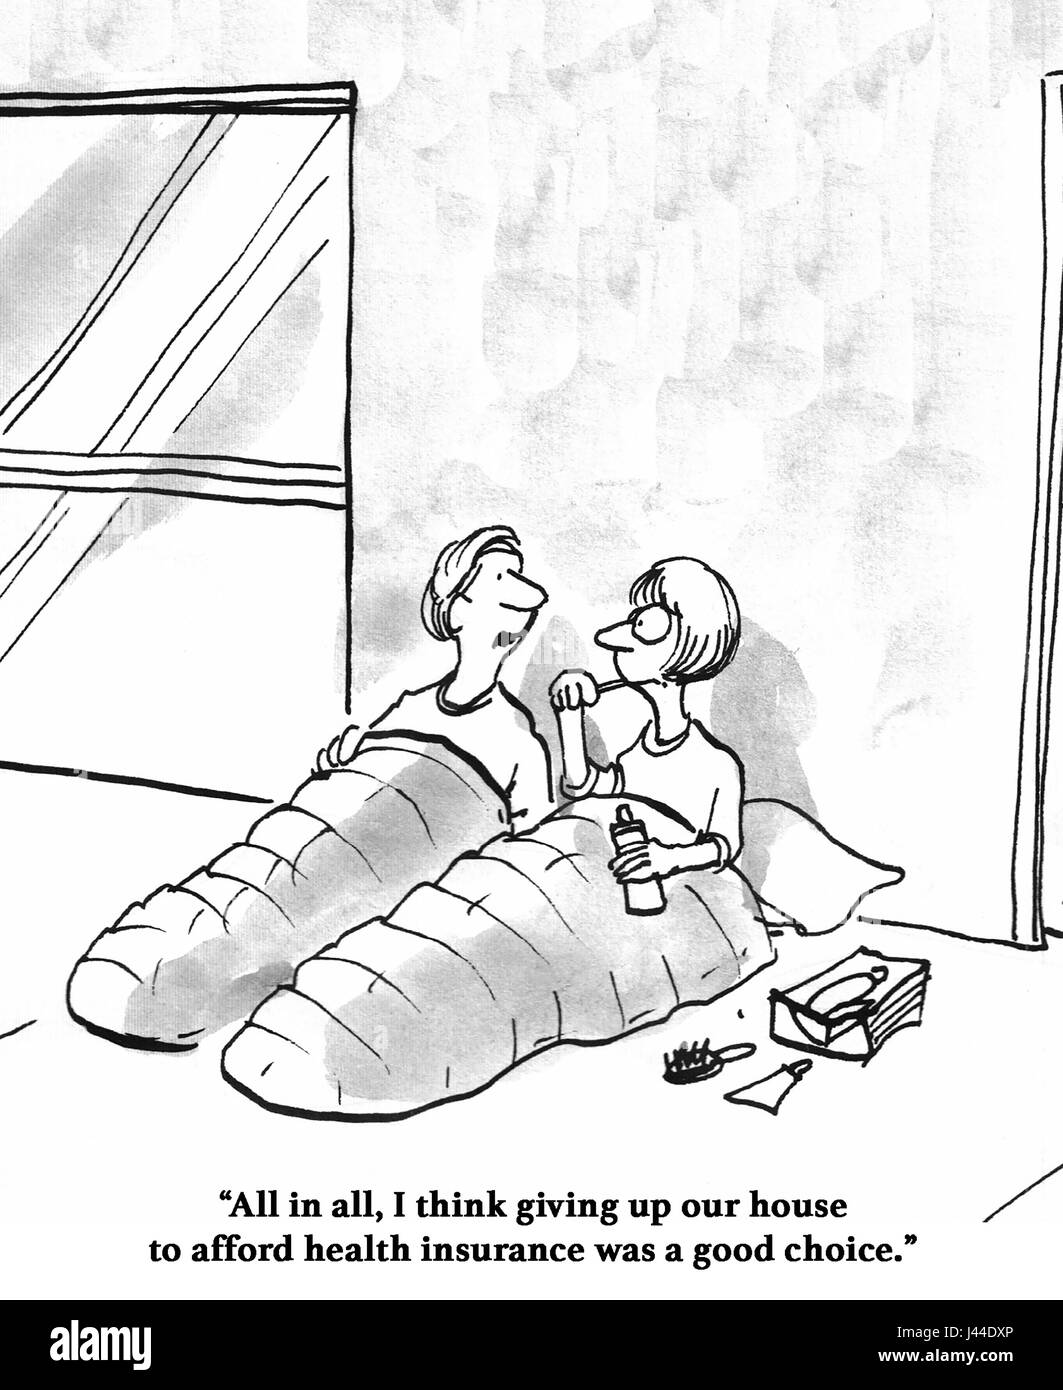 Medical cartoon about a couple who lost their home, health insurance is so expensive. Stock Photo